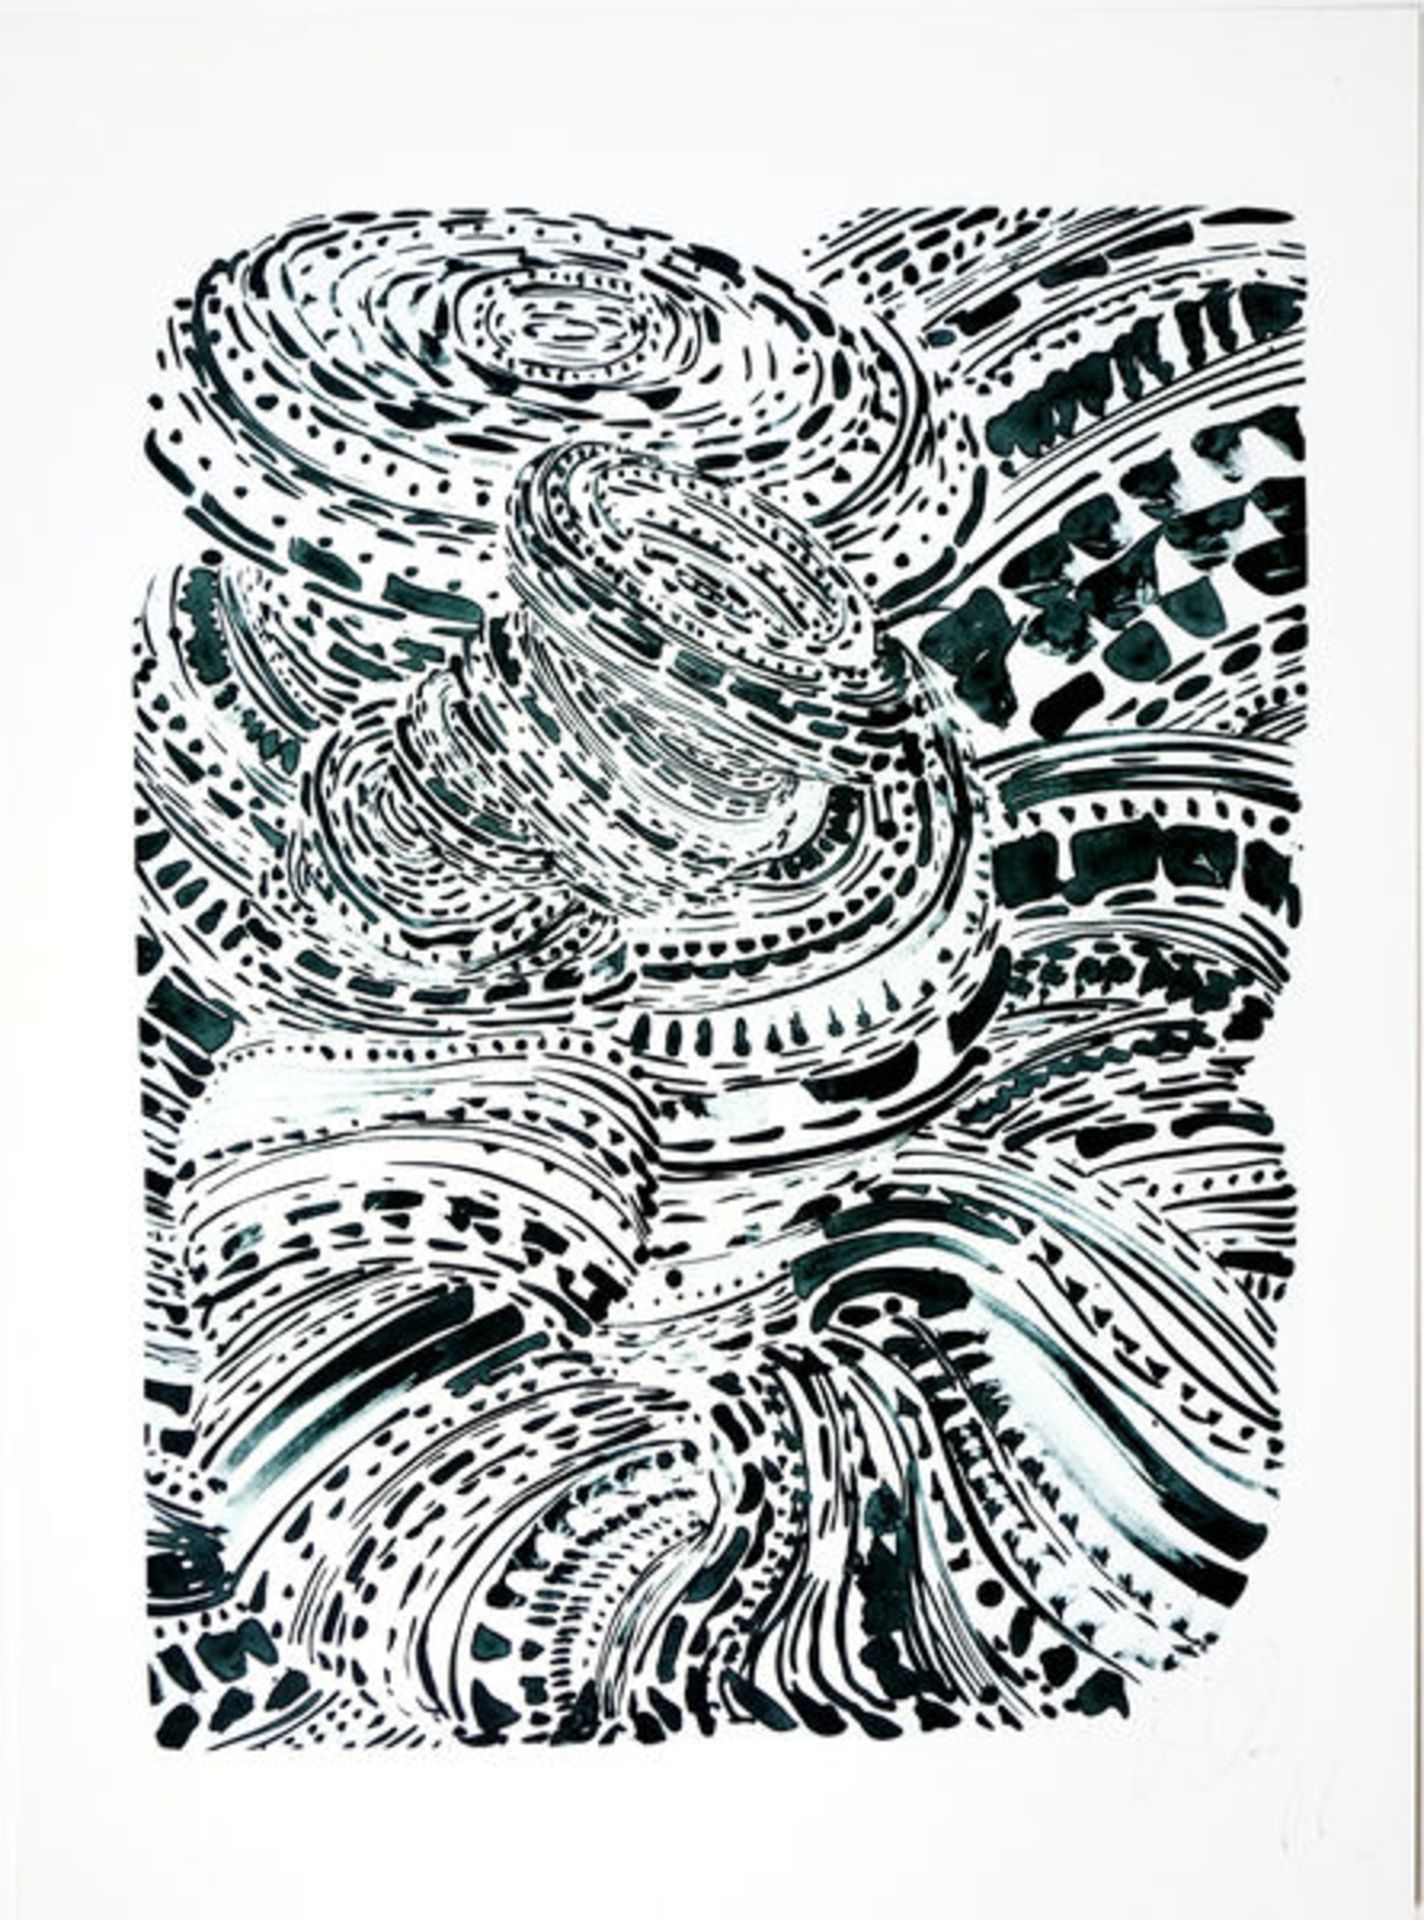 Identities (2000)Lithography on BFK Rives hand made paper. Signed. Sheet size: 76,0 x 55,7 cm.